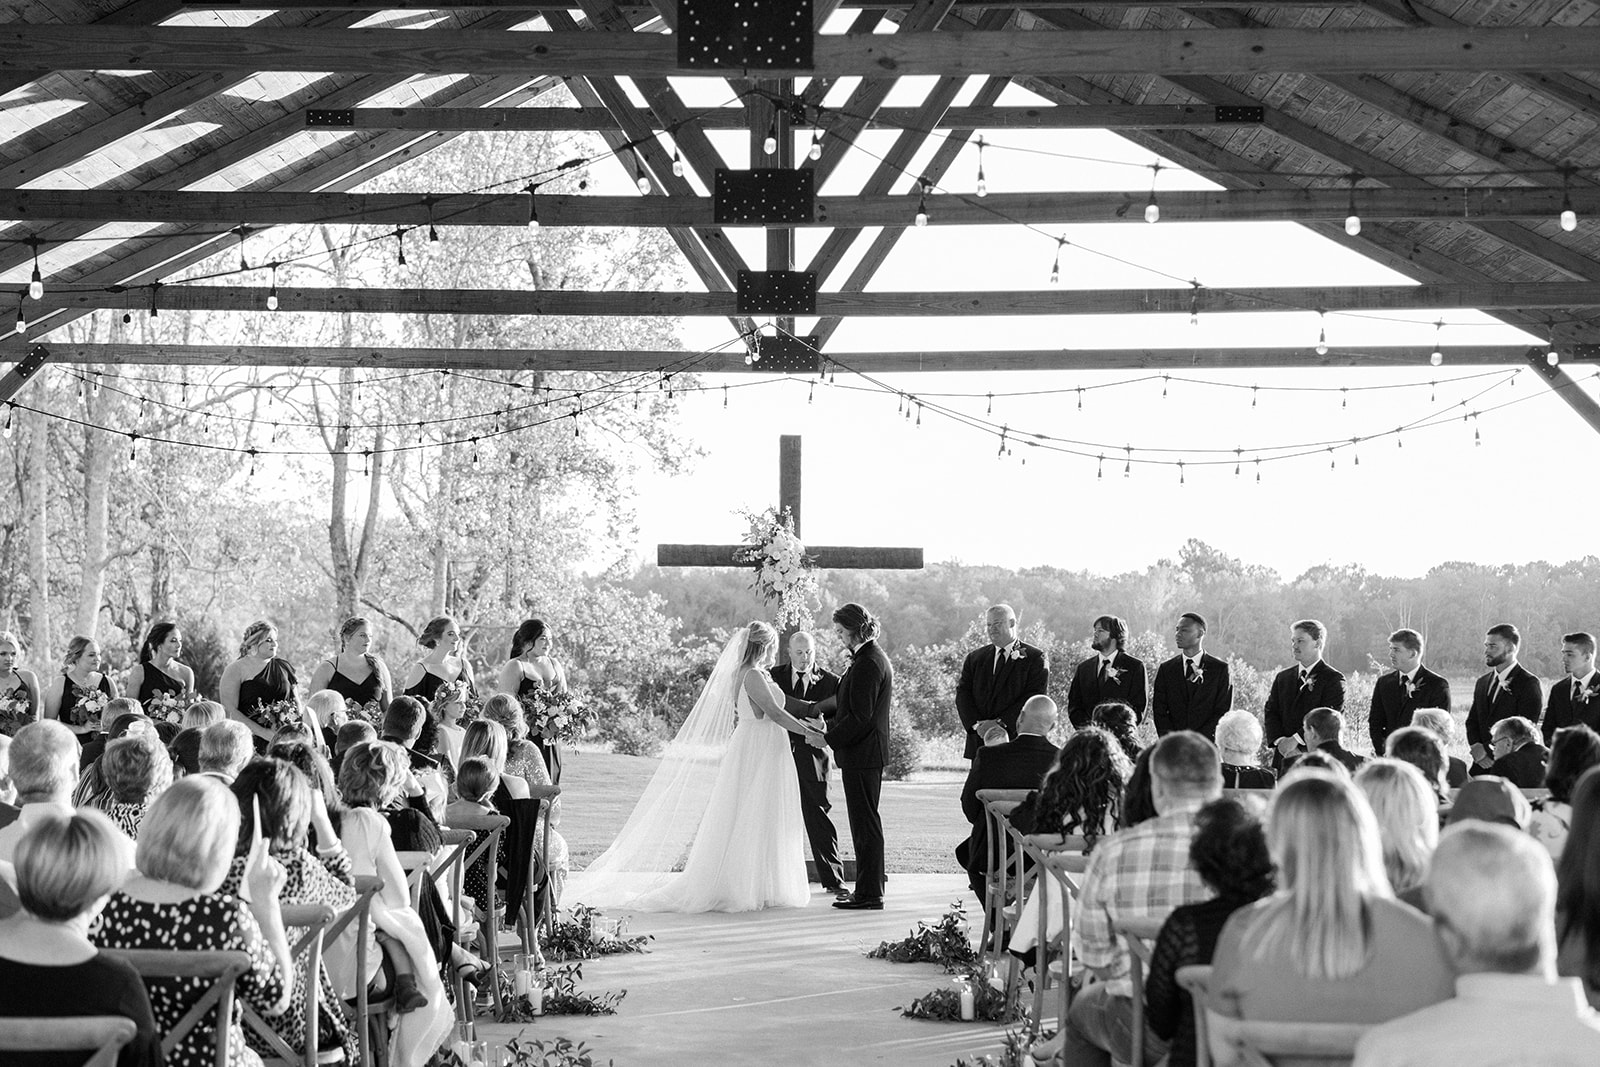 A wedding ceremony in black and white at Harvest Hollow in Toney, Alabama